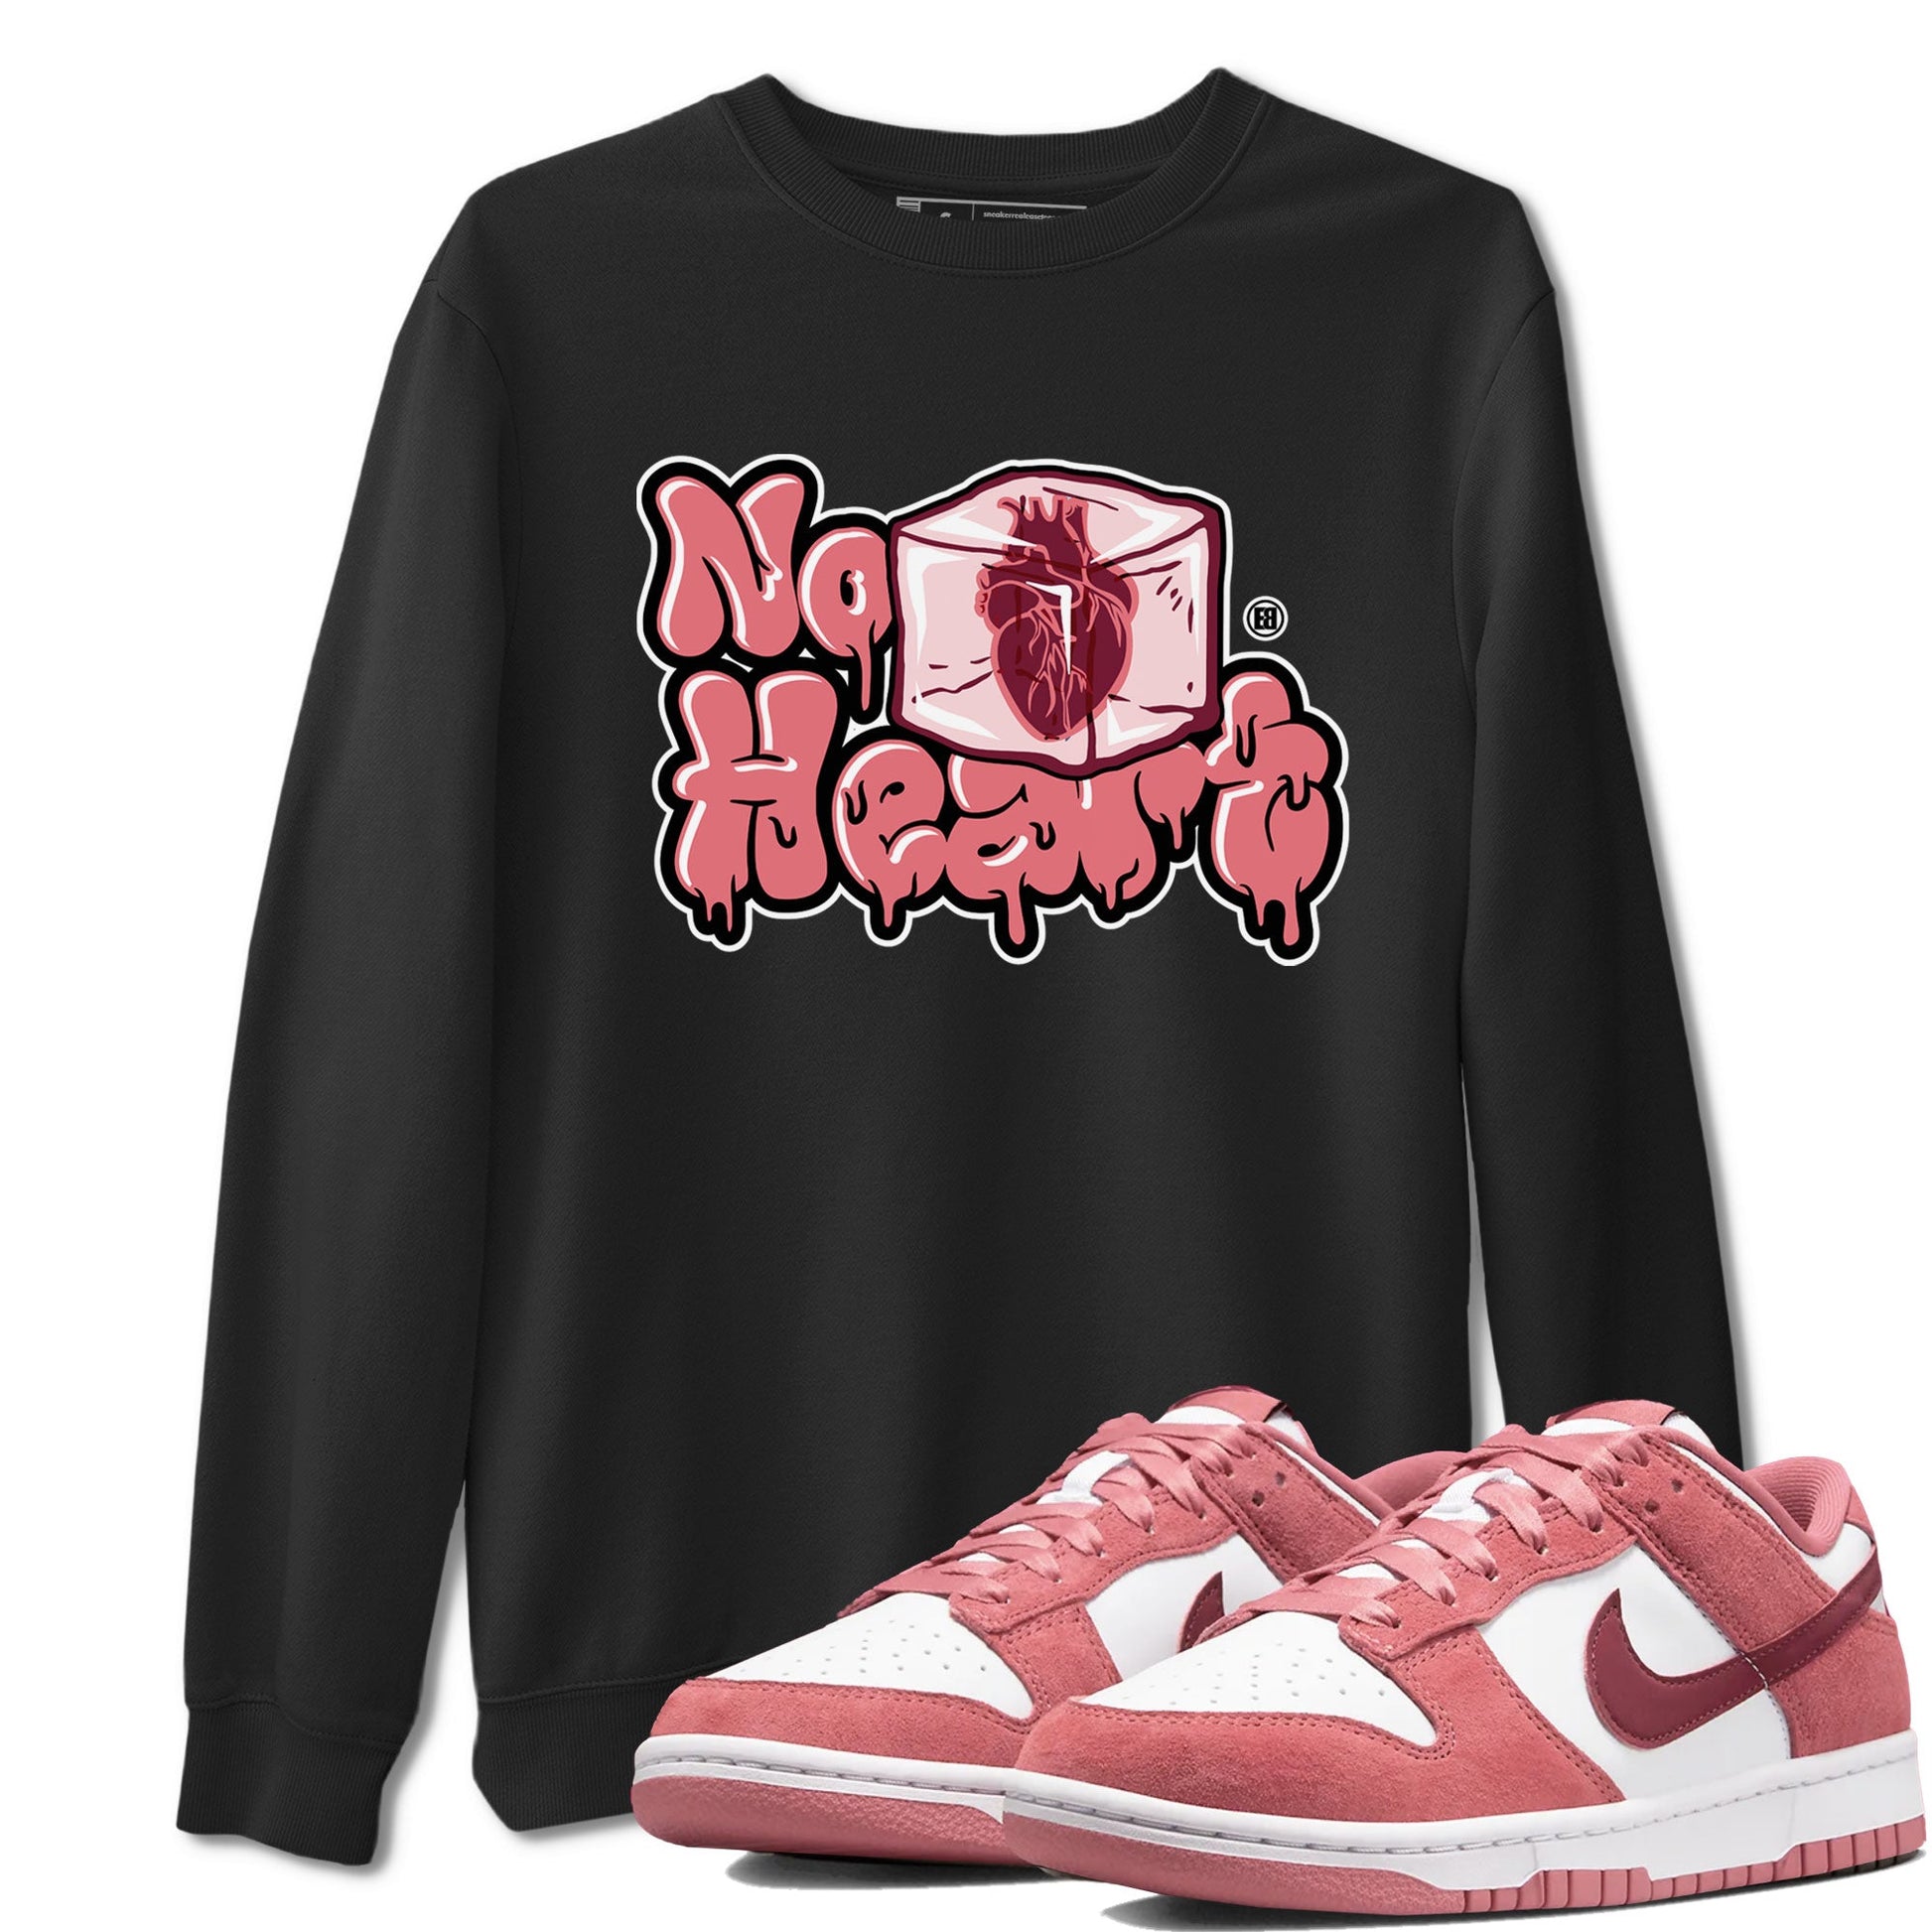 Dunk Valentines Day shirt to match jordans No Hearts sneaker tees Dunk Low Valentine's Day SNRT Sneaker Release Tees Cotton Sneaker Tee Black 1 T-Shirt